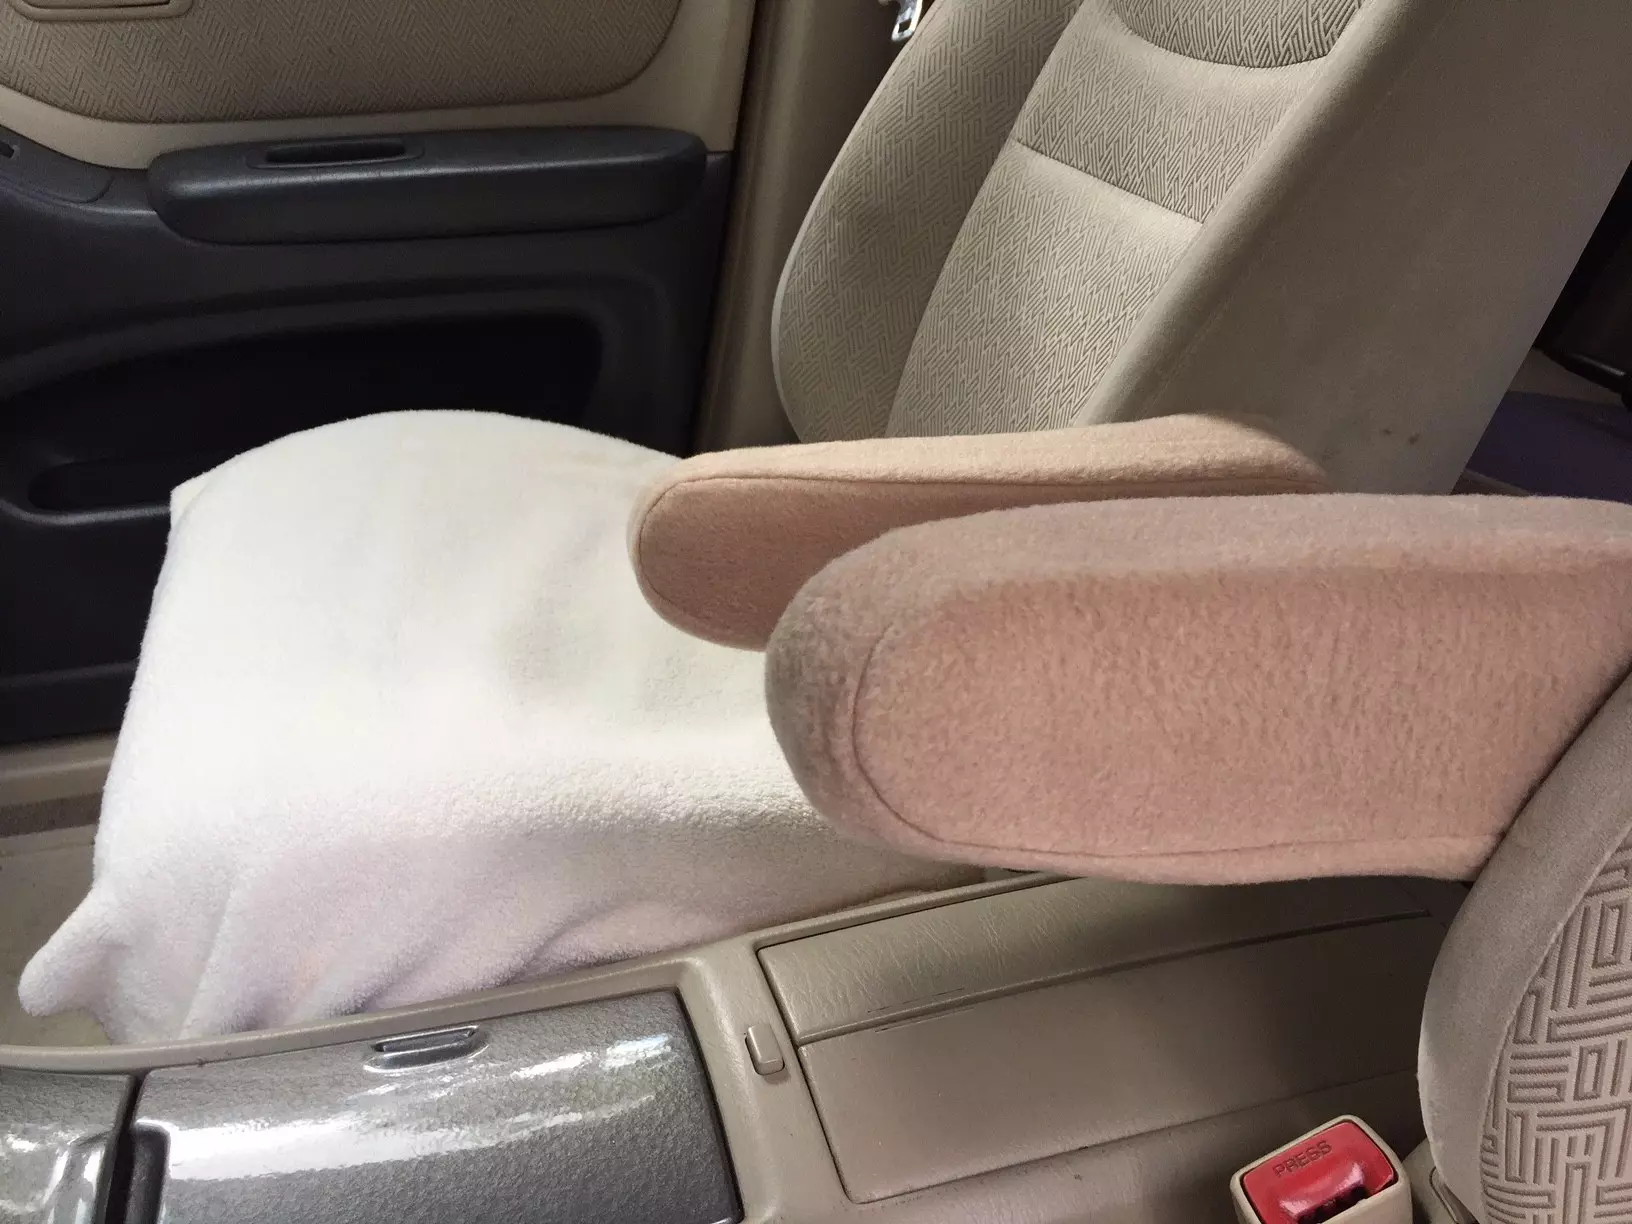 Buy Auto Armrest Cover fits the Toyota Highlander 2001-2007- Fleece Material (Pair)